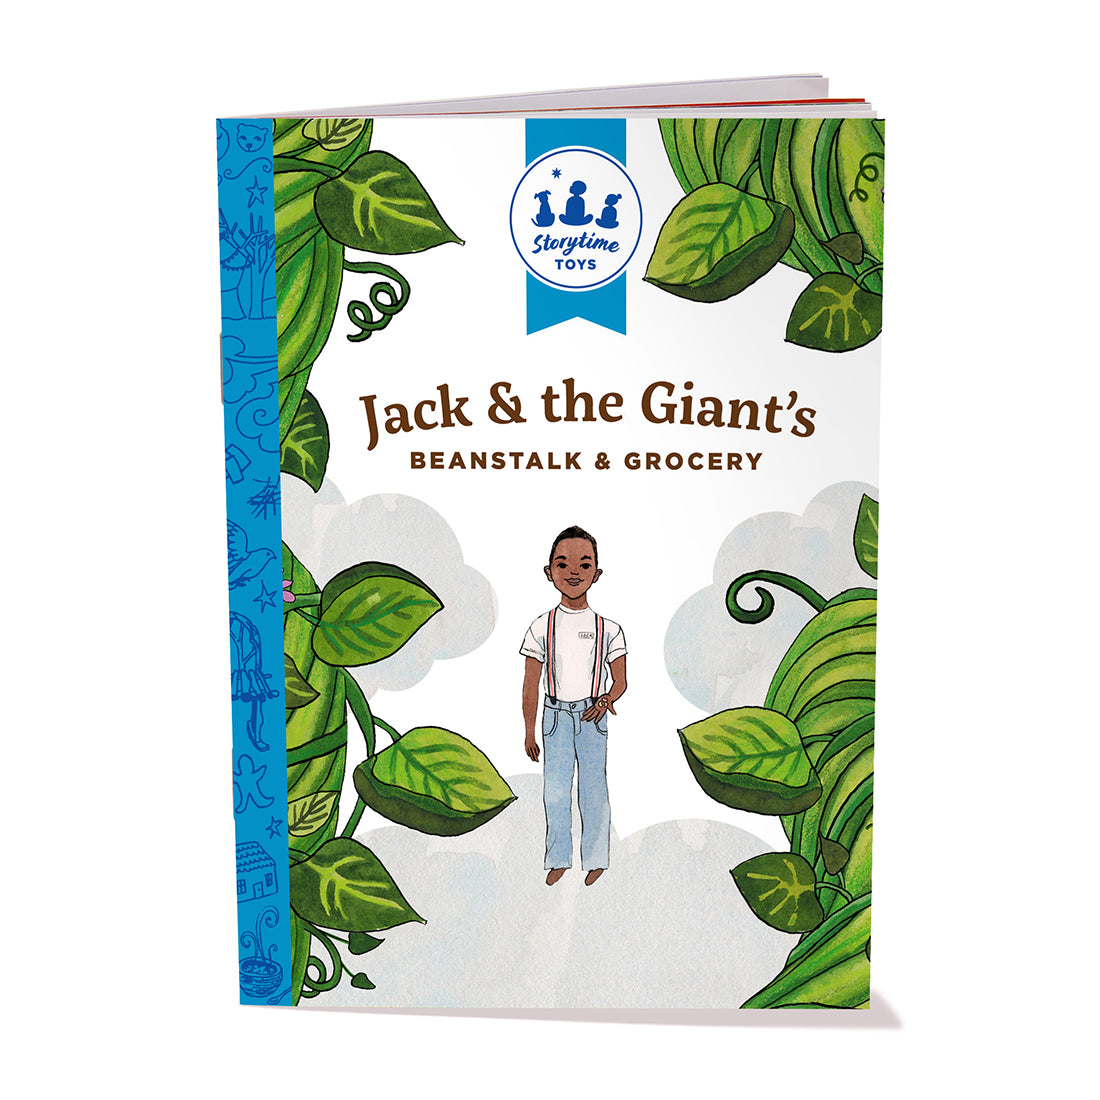 Jack and the Giant's Grocery Store and Beanstalk